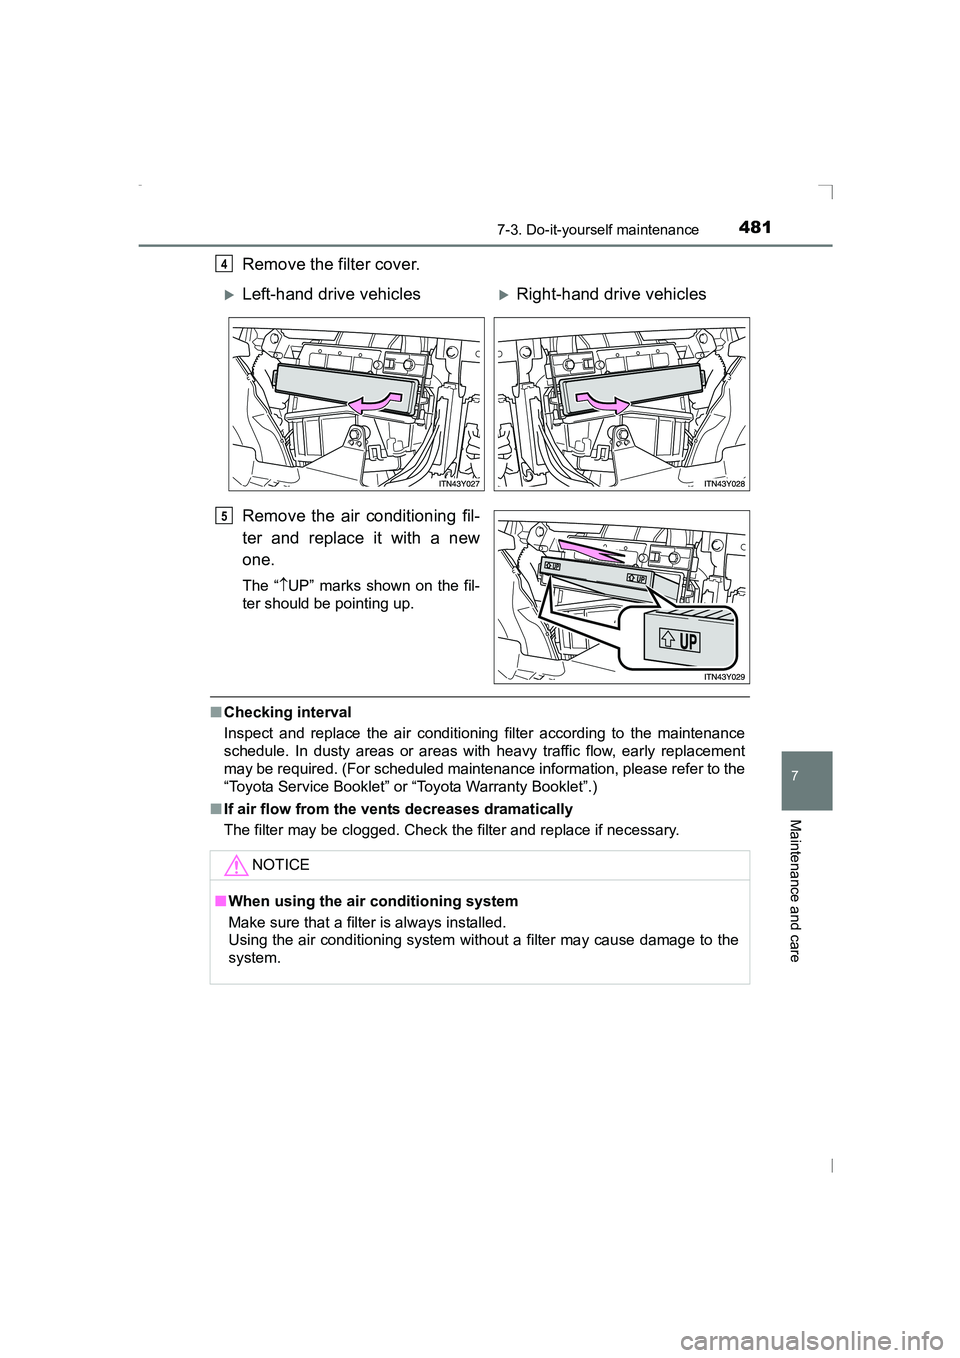 TOYOTA AVENSIS 2015  Owners Manual 4817-3. Do-it-yourself maintenance
AVENSIS_OM_OM20C20E_(EE)
7
Maintenance and care
Remove the filter cover.
Remove the air conditioning fil-
ter and replace it with a new
one.
The “↑UP” marks sh